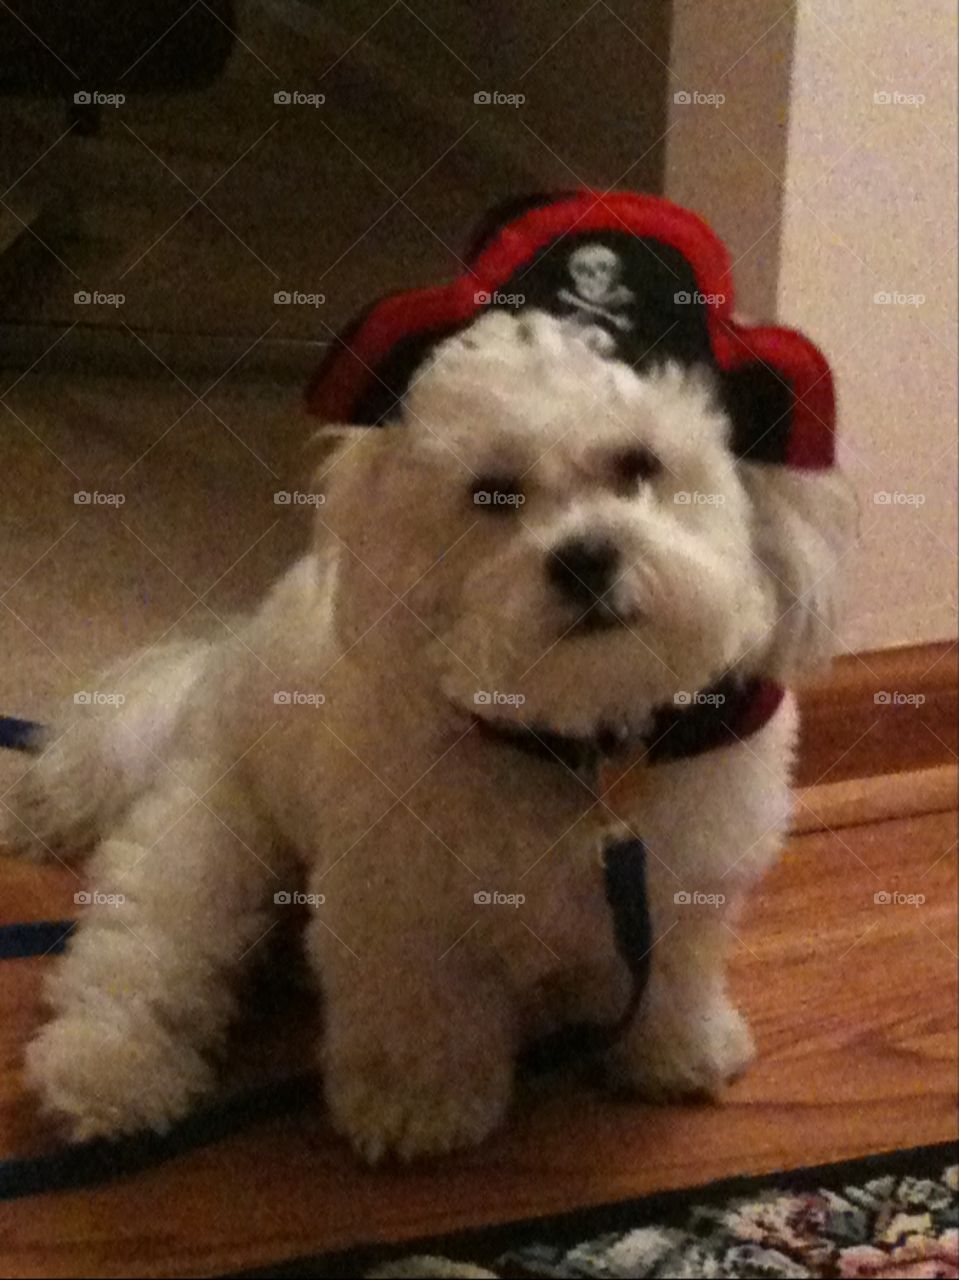 Pirate pup. Not happy about the hat